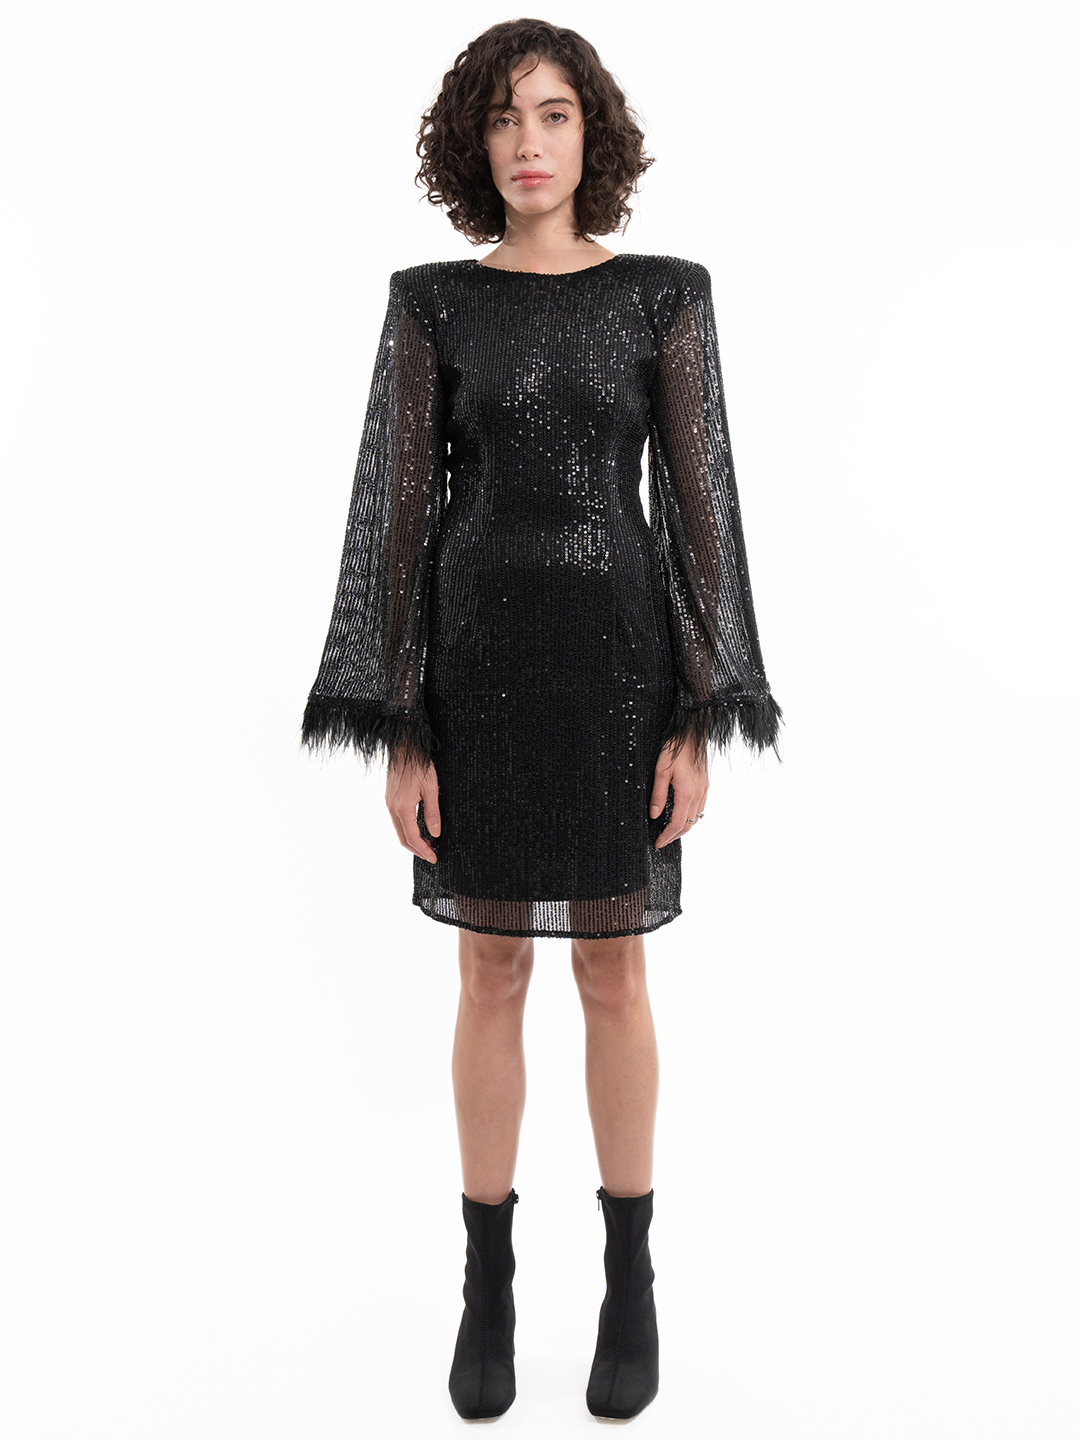 Celestial Sequence Chic Black Dress - Front